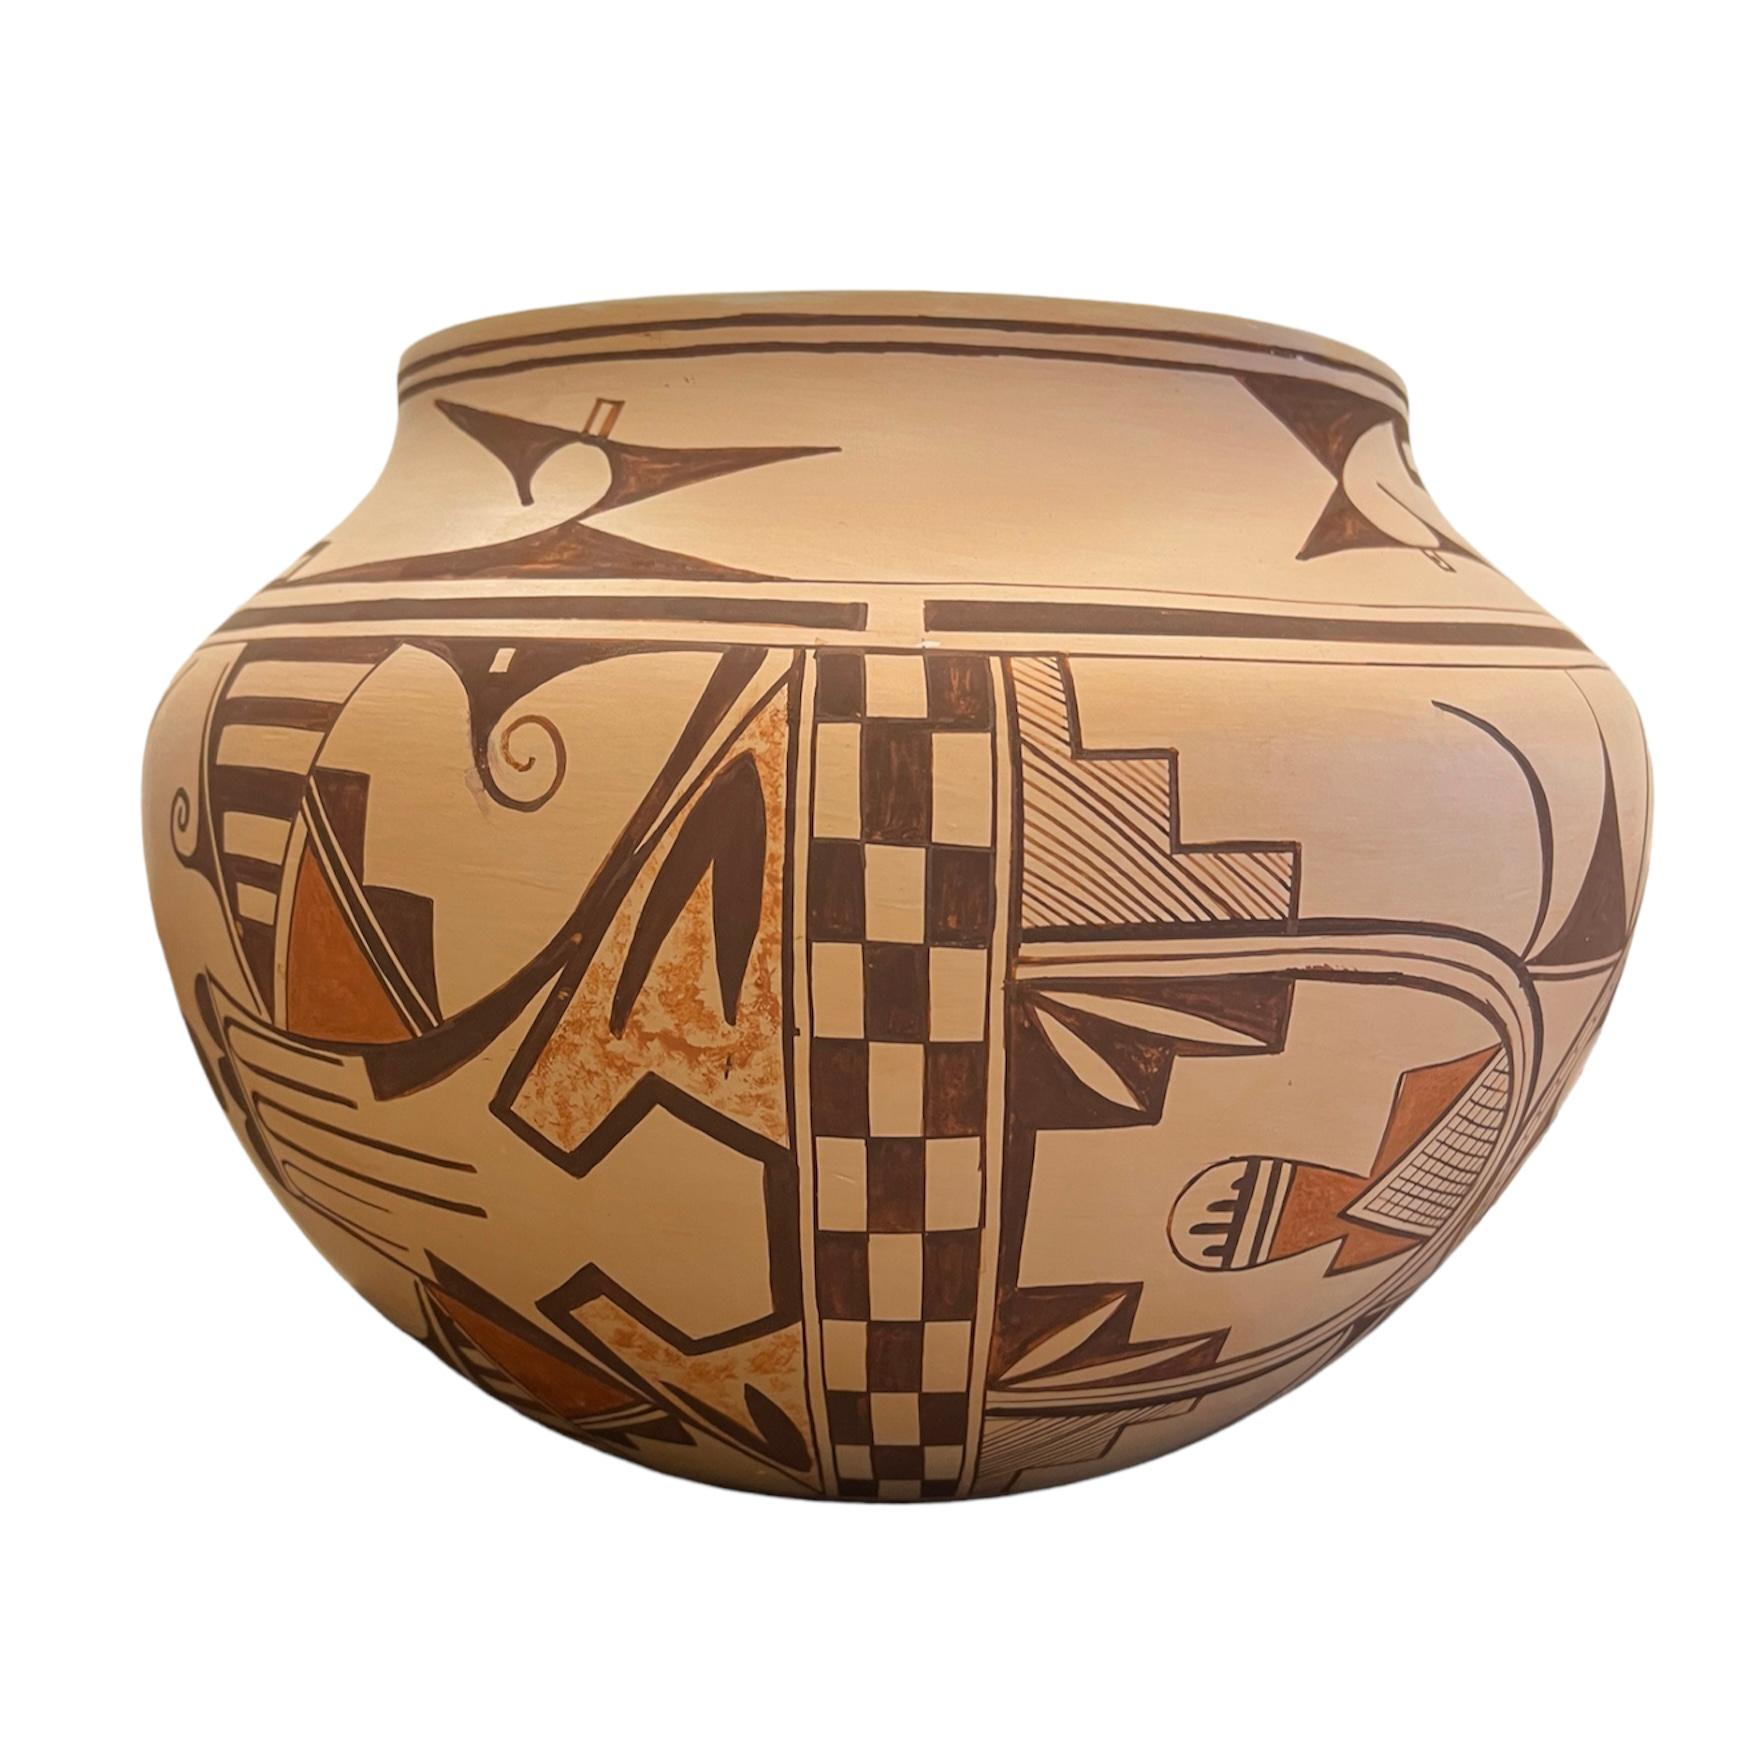 Tesuque Storage Jar  - Brown Abstract Sculpture by Jacob Frye 